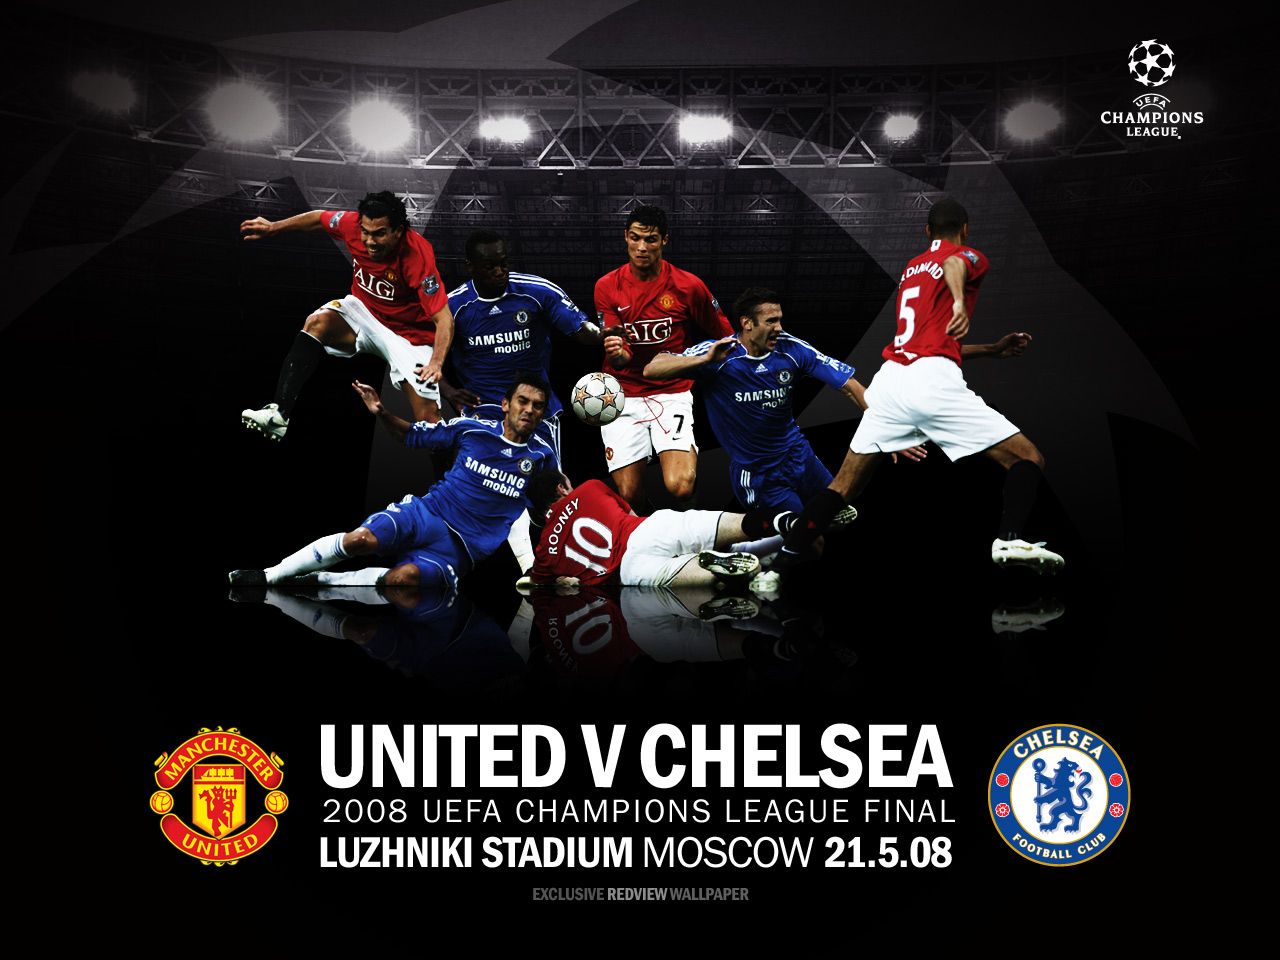 Manchester United Vs Chelsea 2011 2012 Wallpapers | Sports Mania